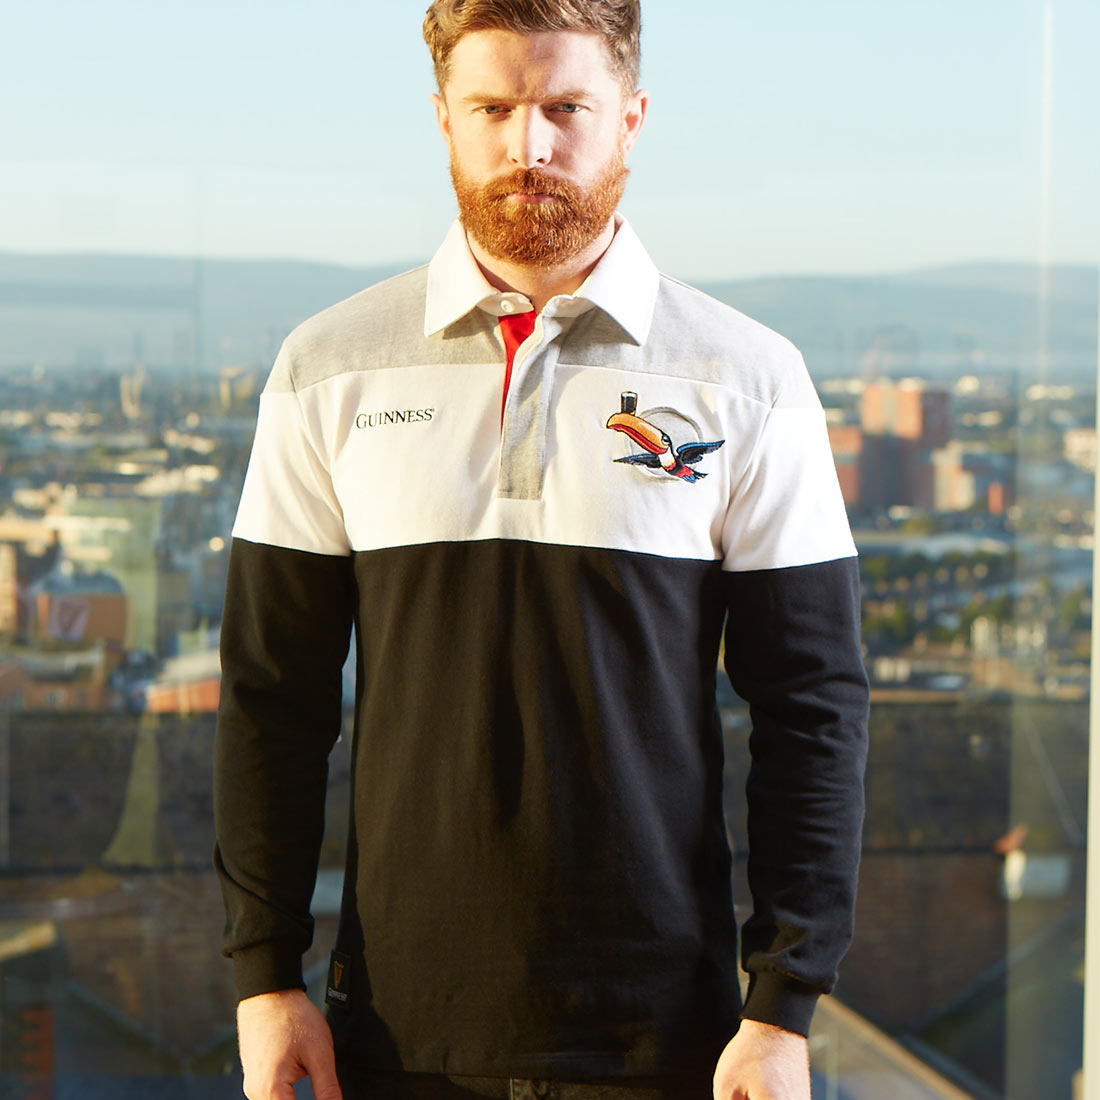 A bearded man in a Guinness Toucan Rugby Jersey standing in front of a city, showcasing branding for Guinness UK.